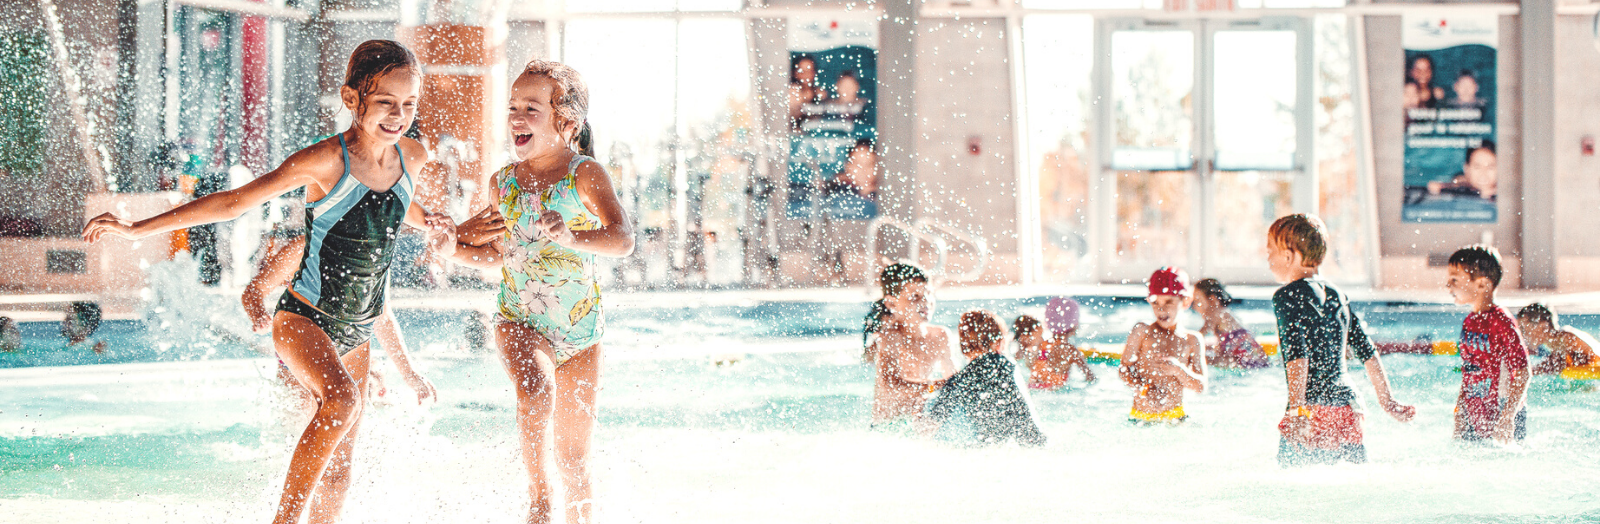 Kids playing in the recreational pool